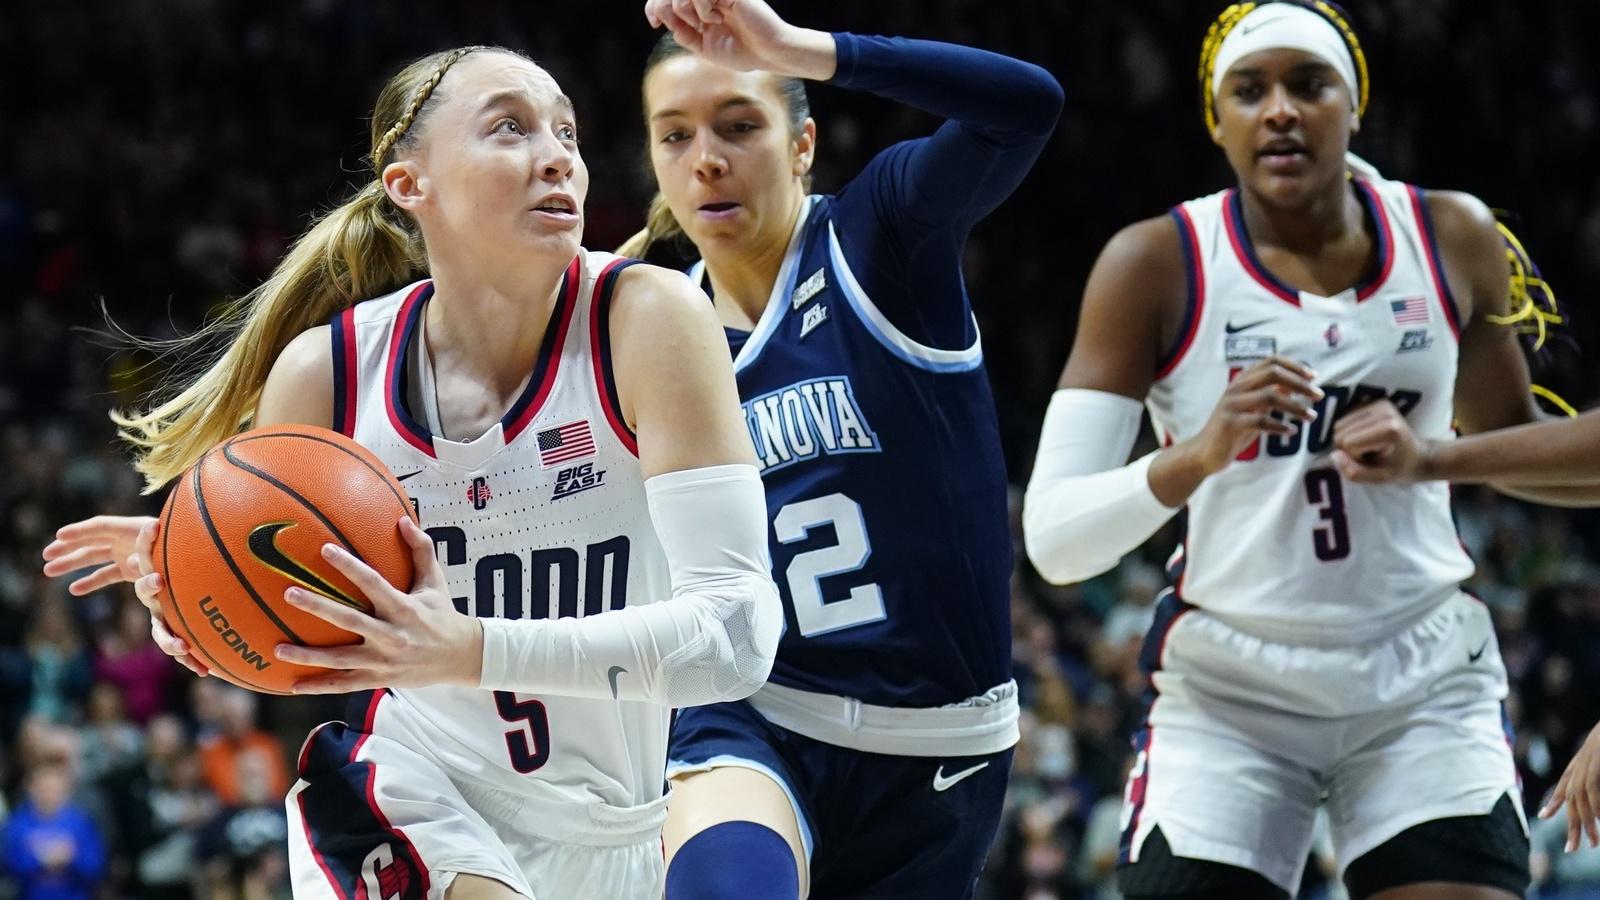 UConn Huskies guard Paige Bueckers (5) drives the ball against Villanova Wildcats guard Bella Runyan (32) in the first half at Harry A. Gampel Pavilion. / David Butler II-USA TODAY Sports